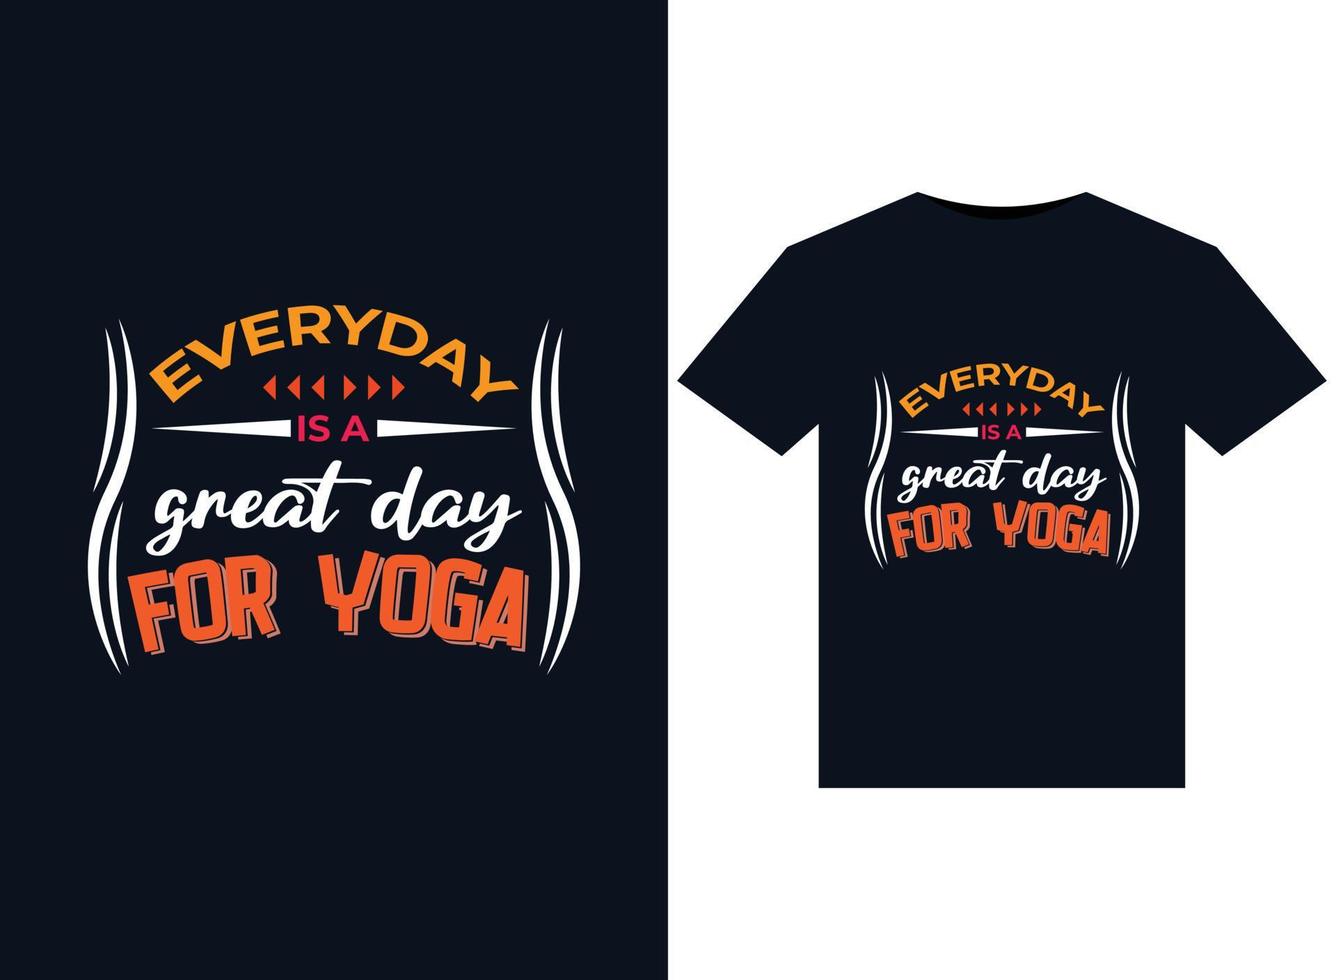 Everyday is a great day for yoga illustrations for print-ready T-Shirts design vector